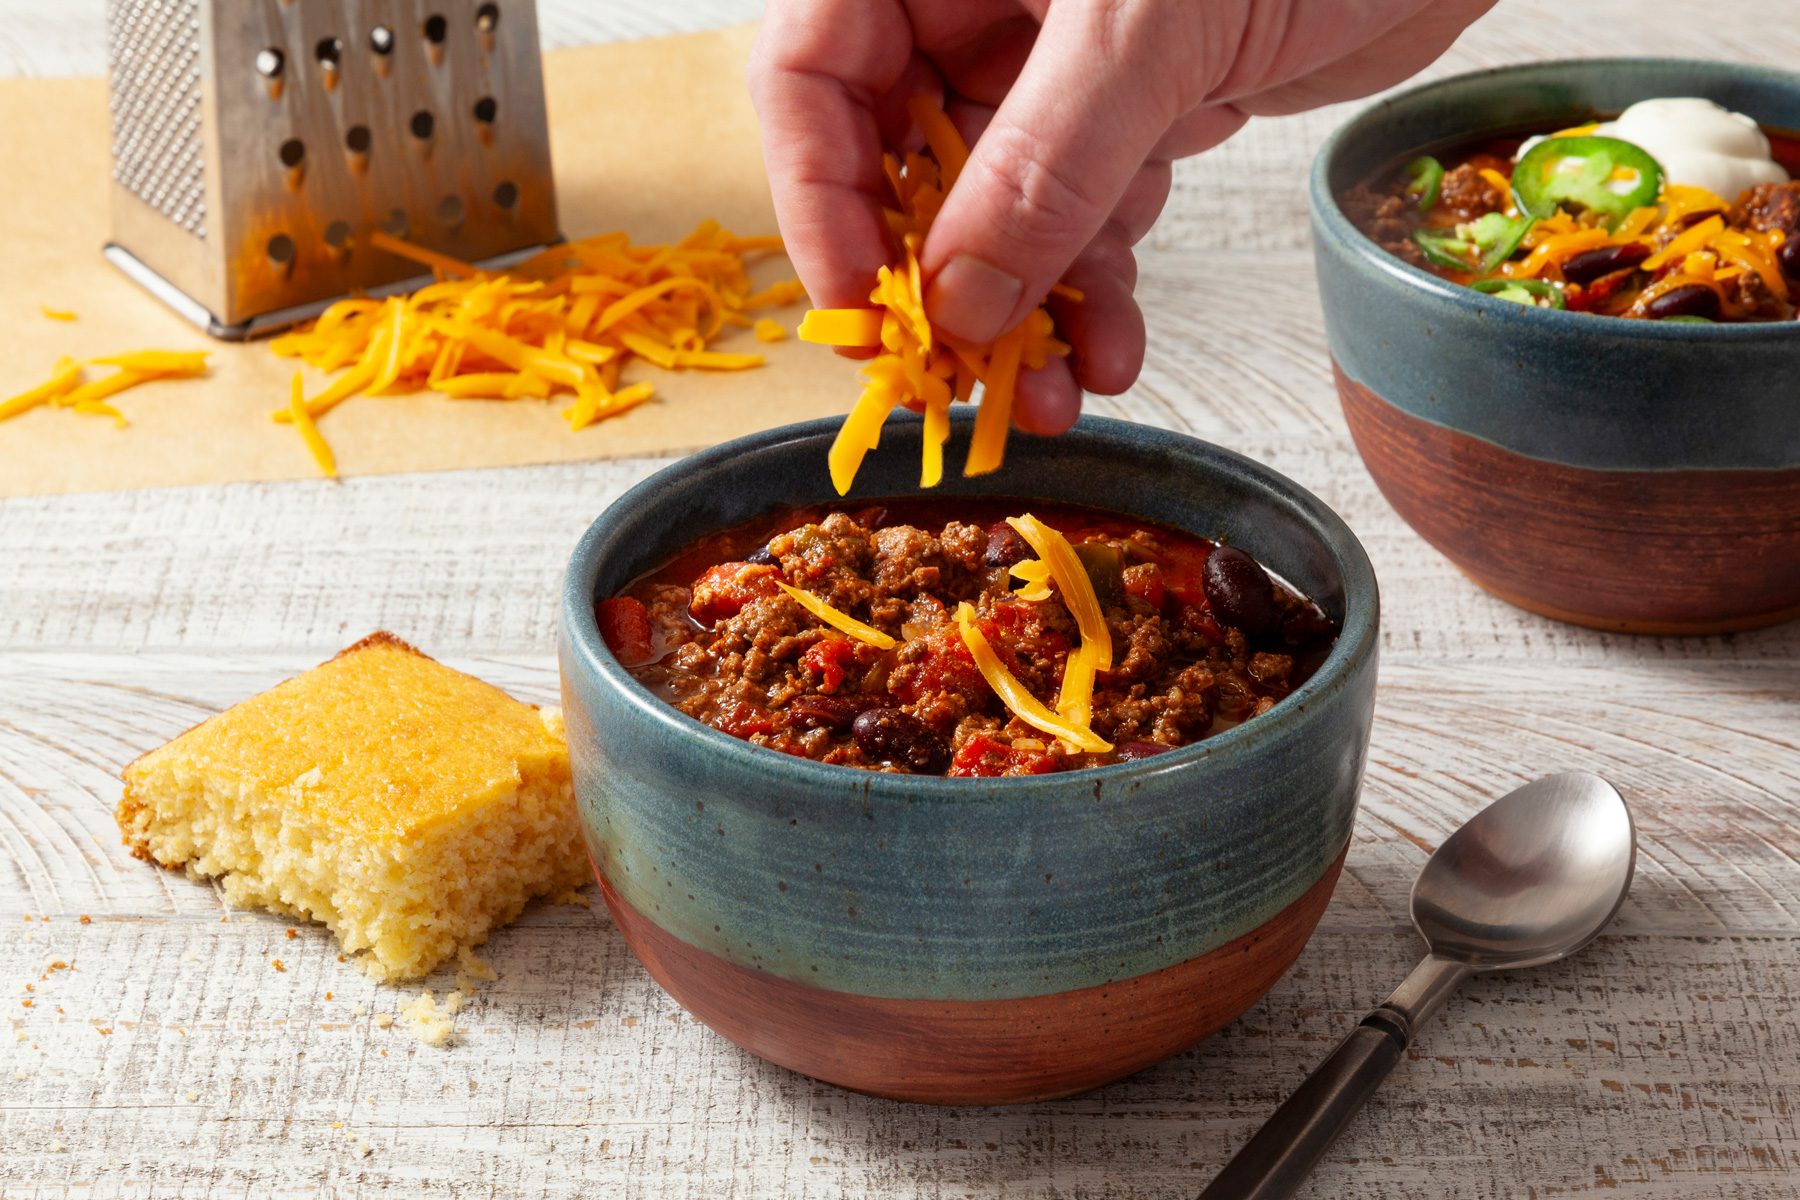 A person putting cheese into a bowl of chili con carne 